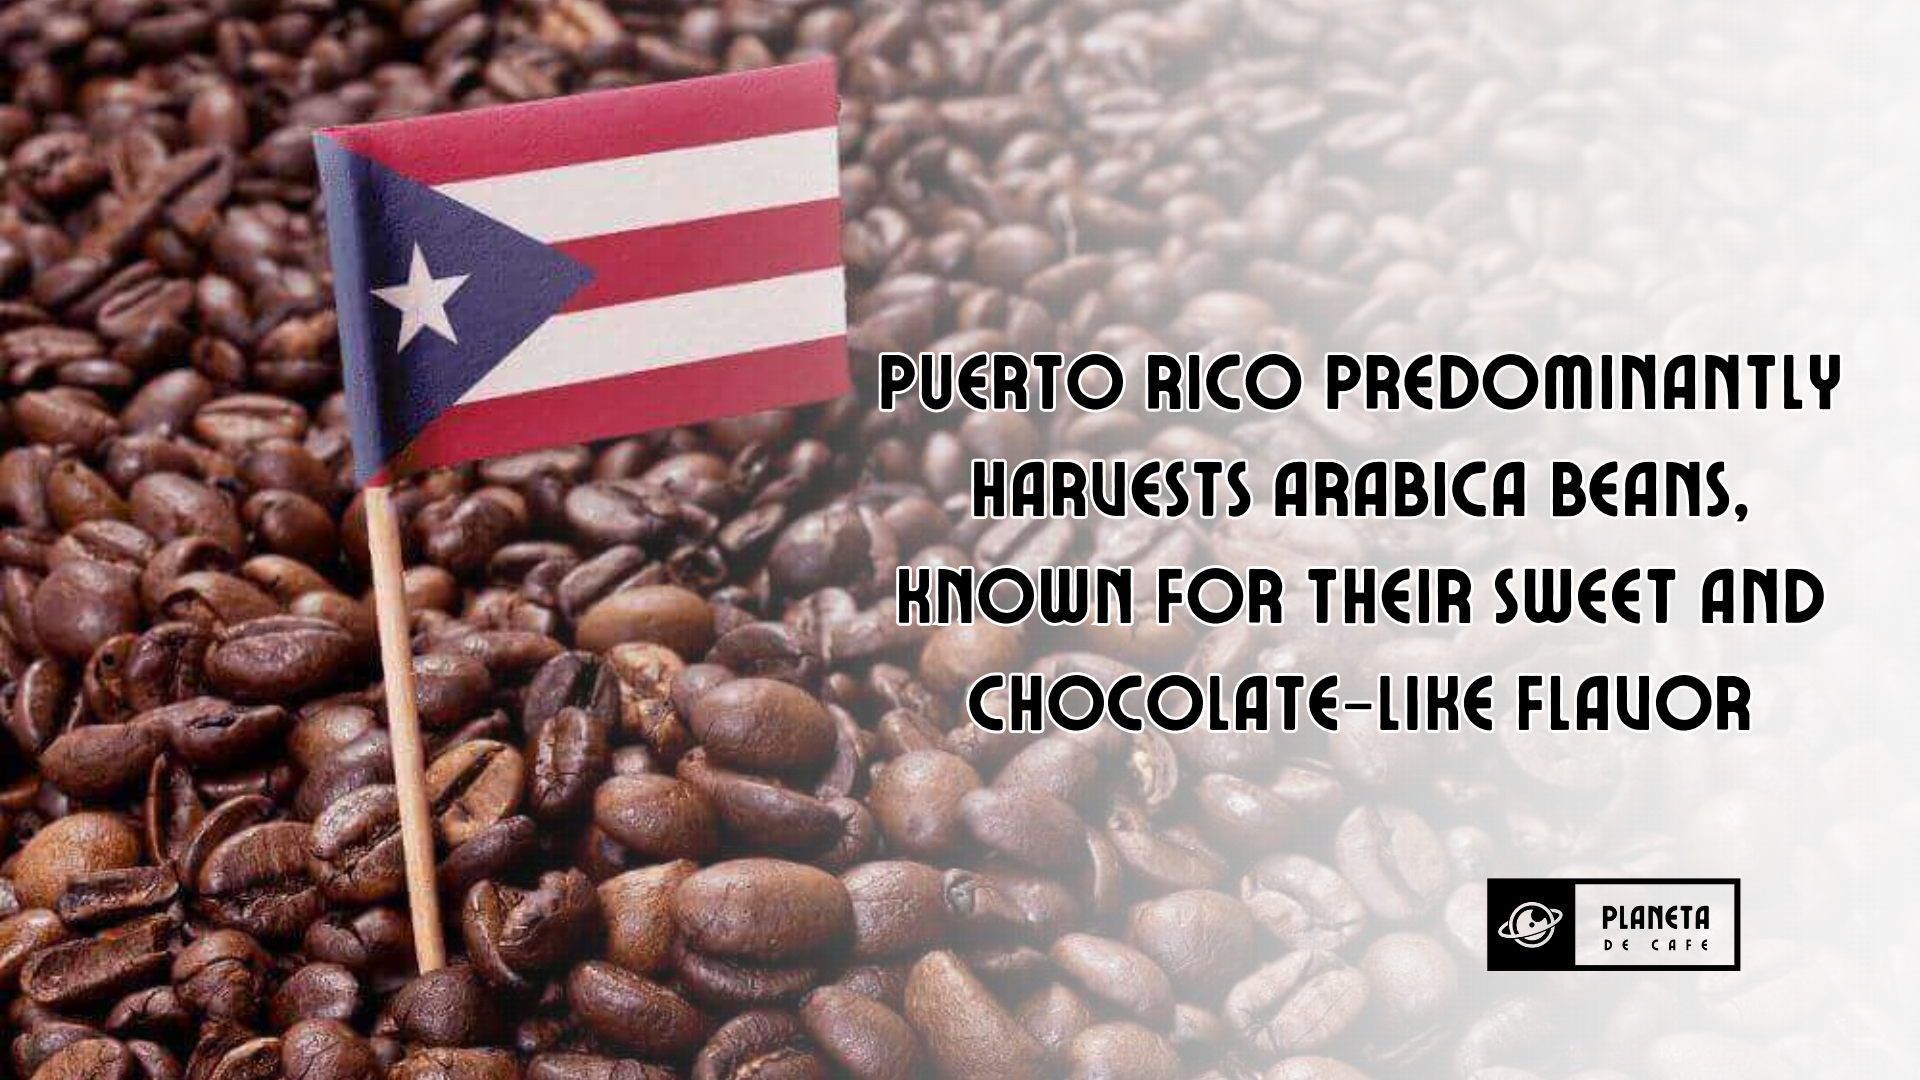 Puerto Rico predominantly harvests Arabica beans, known for their sweet and chocolate-like flavor